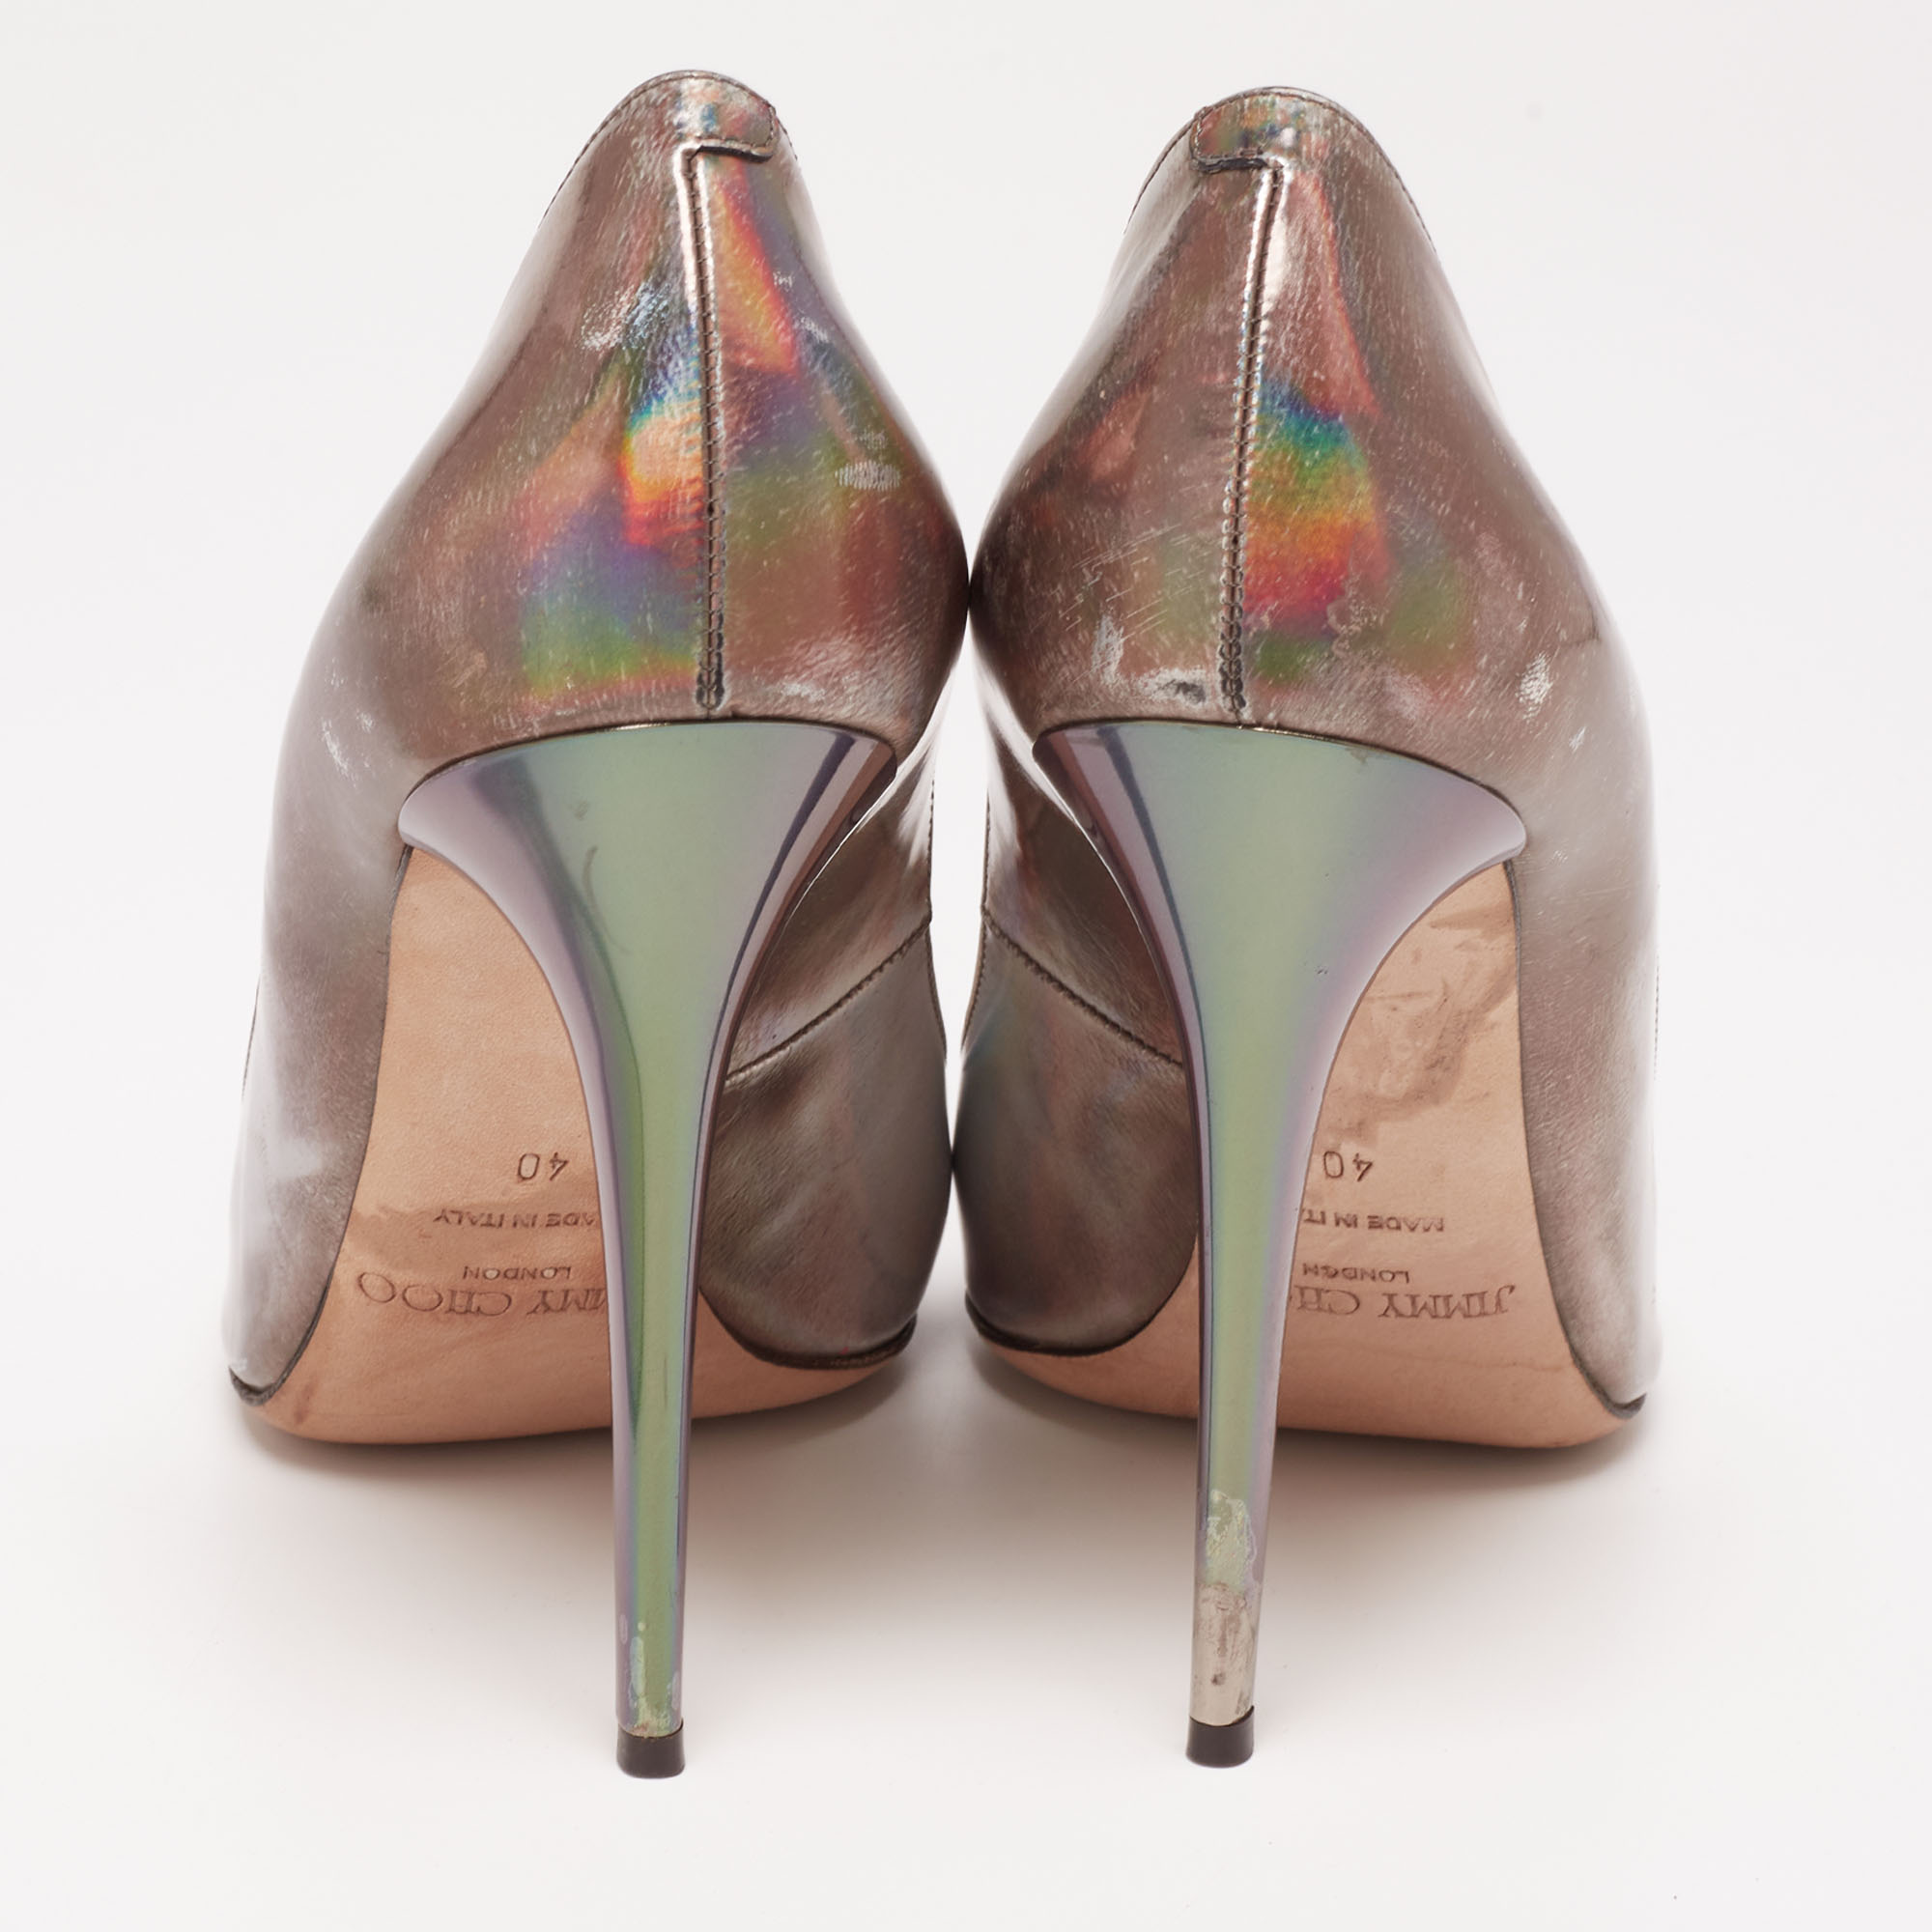 Jimmy Choo Multicolor Iridescent Leather Avril Pointed Toe Pumps Size 40